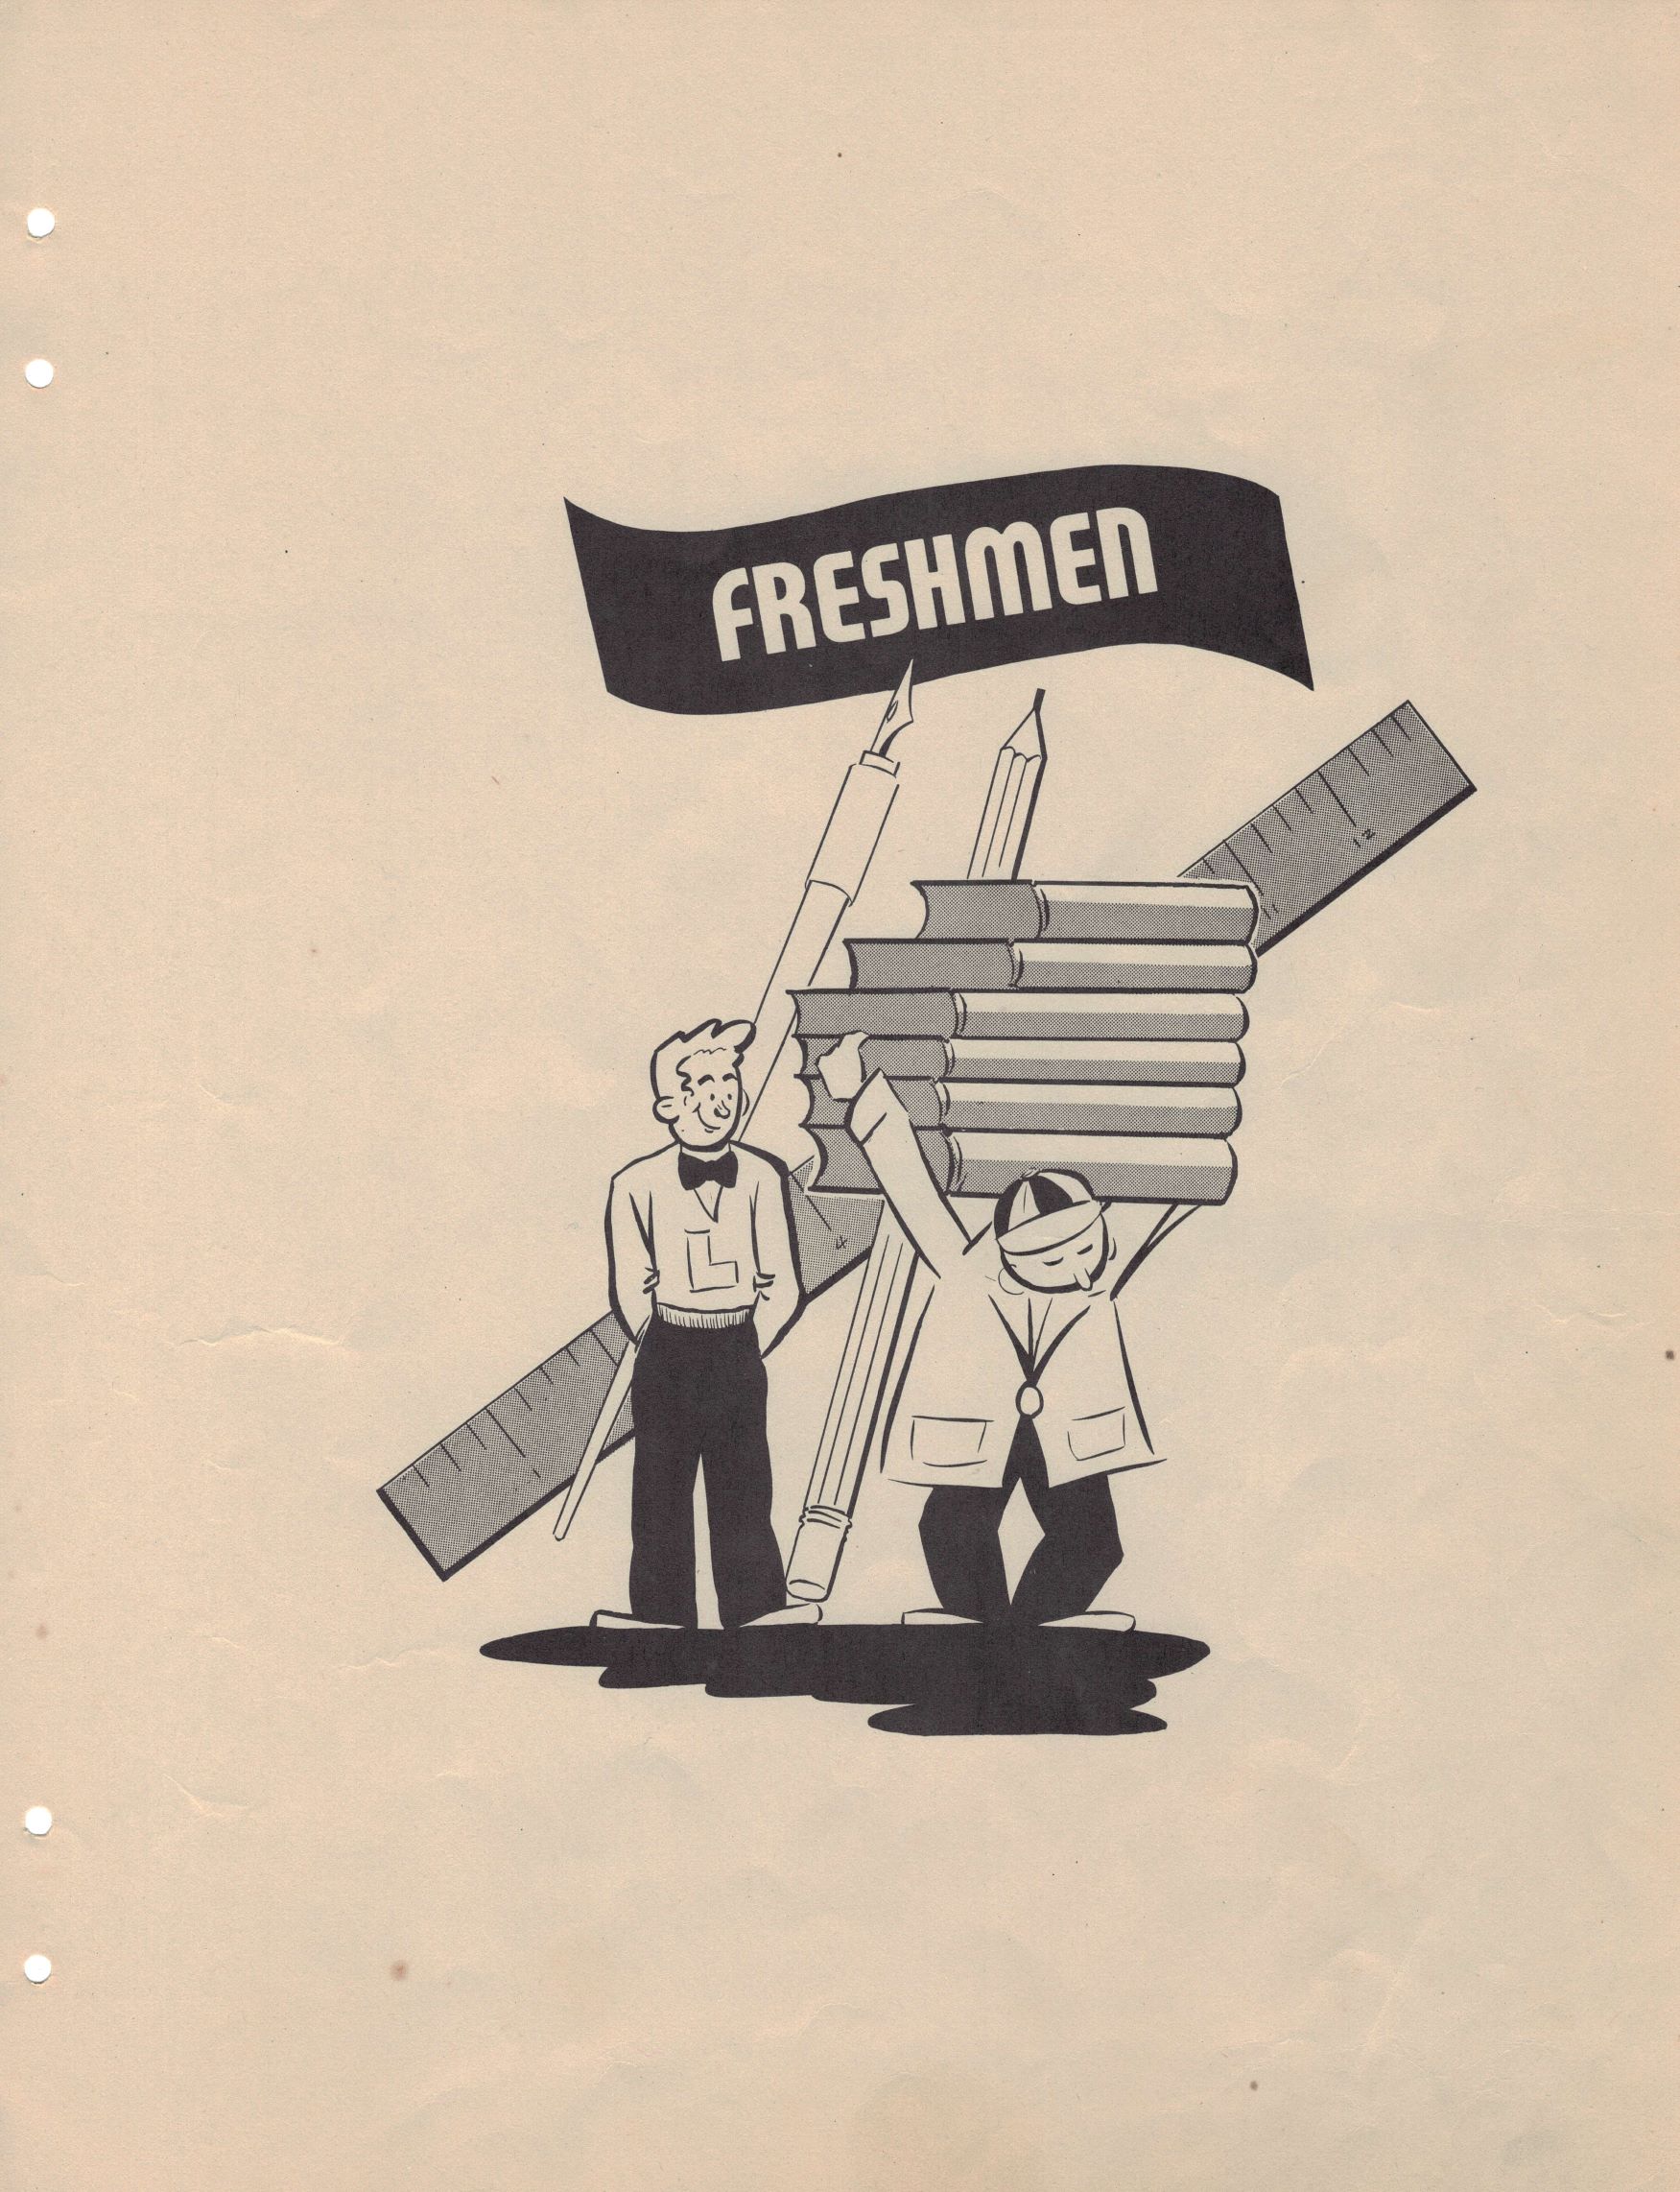 Graphic of man holding a stack of gigantic books on his shoulders with another man walking beside him in front of a graphic of a dip pen, a pencil, and a ruler, all under the heading "Freshmen"